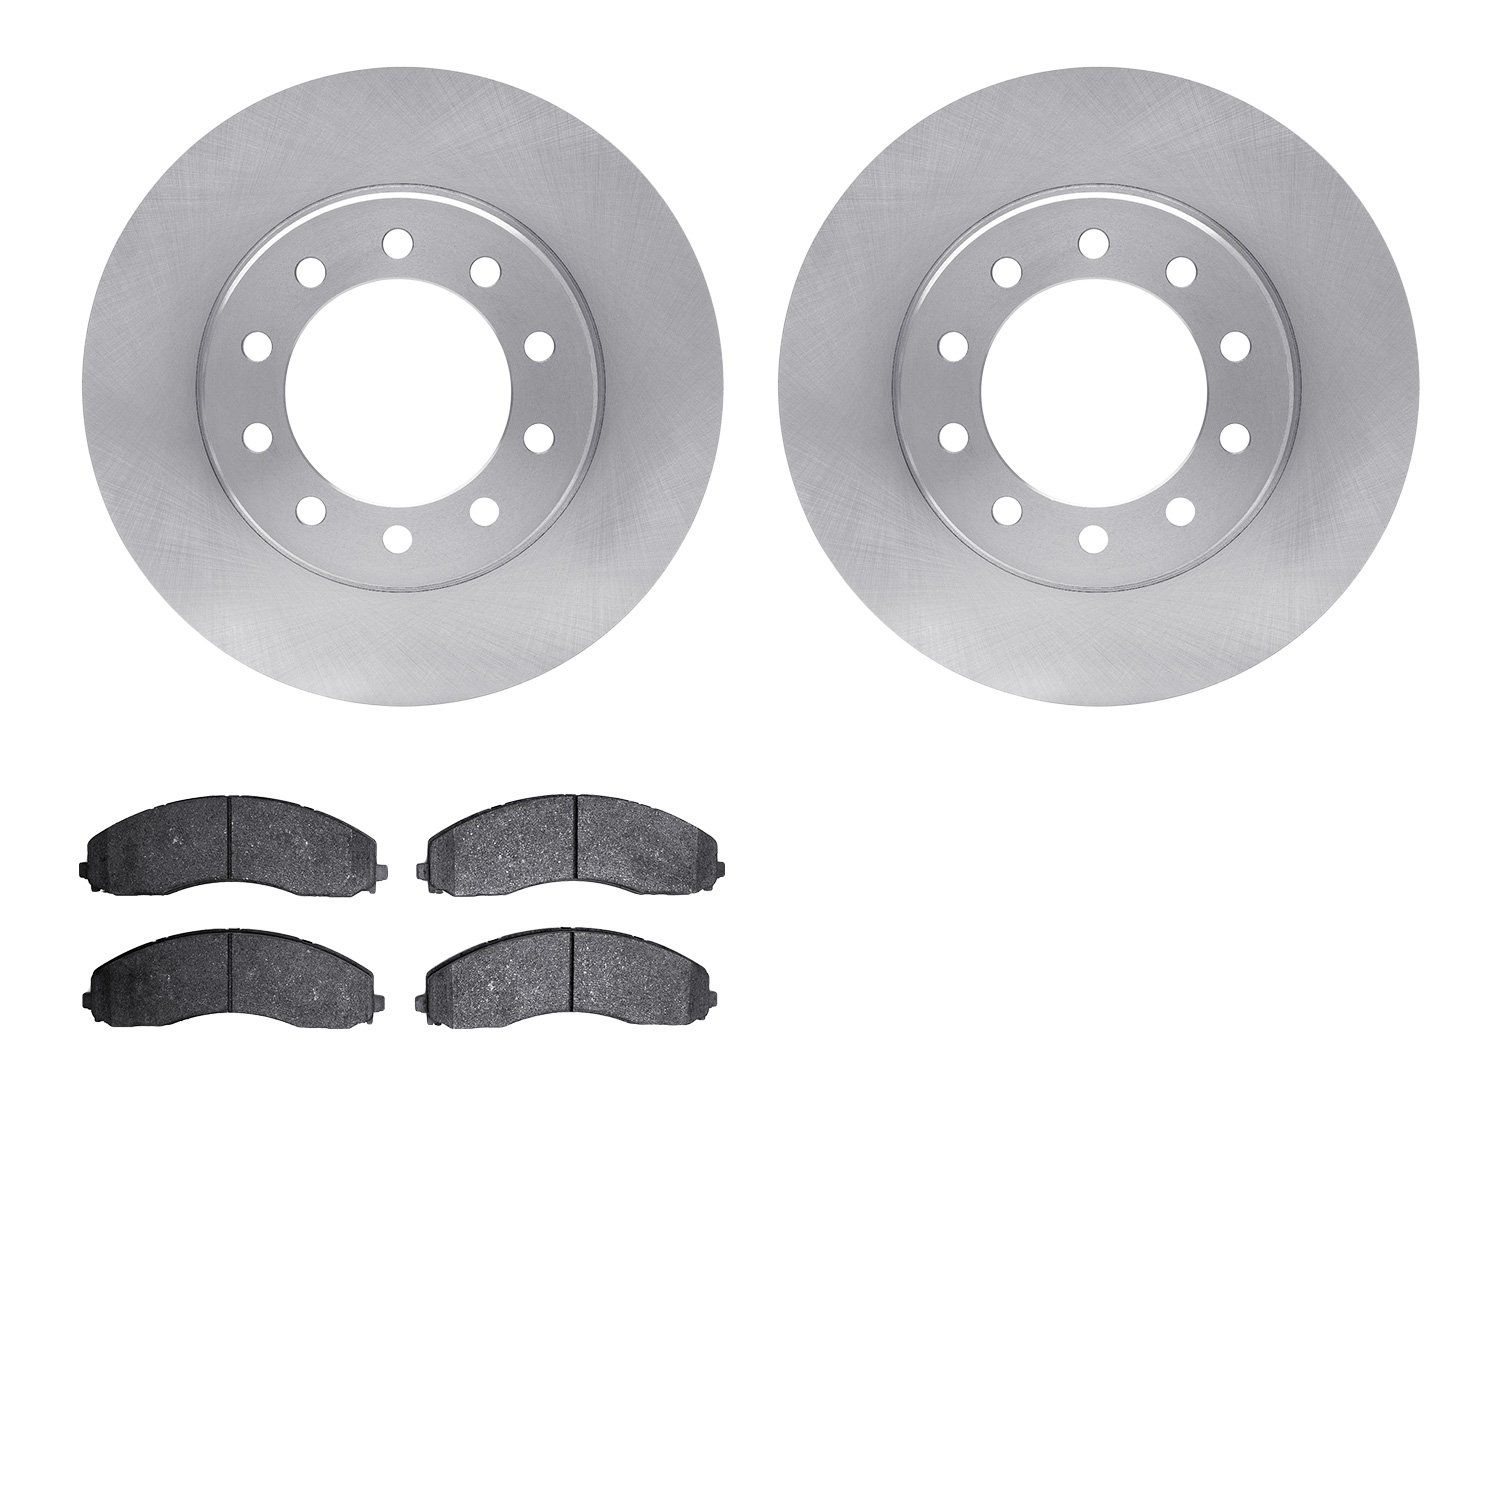 6202-99759 Brake Rotors w/Heavy-Duty Brake Pads Kit, Fits Select Ford/Lincoln/Mercury/Mazda, Position: Front